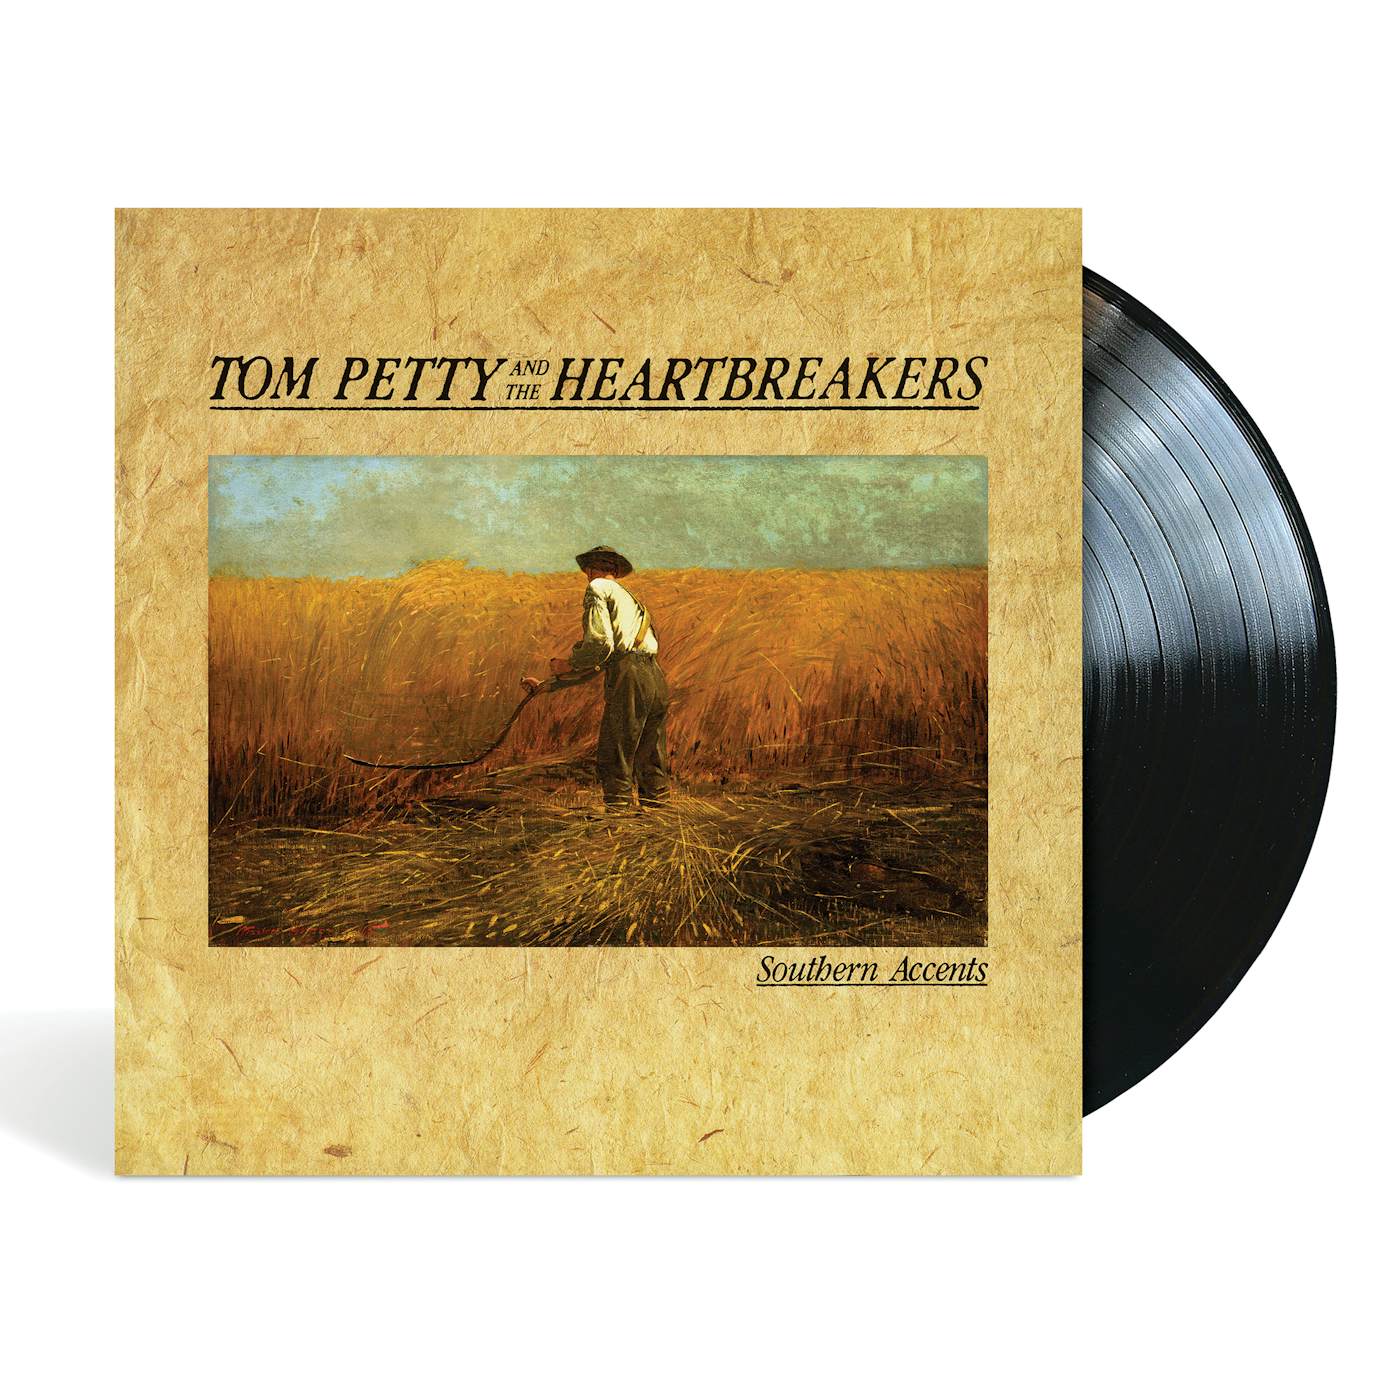 Tom Petty and the Heartbreakers Southern Accents